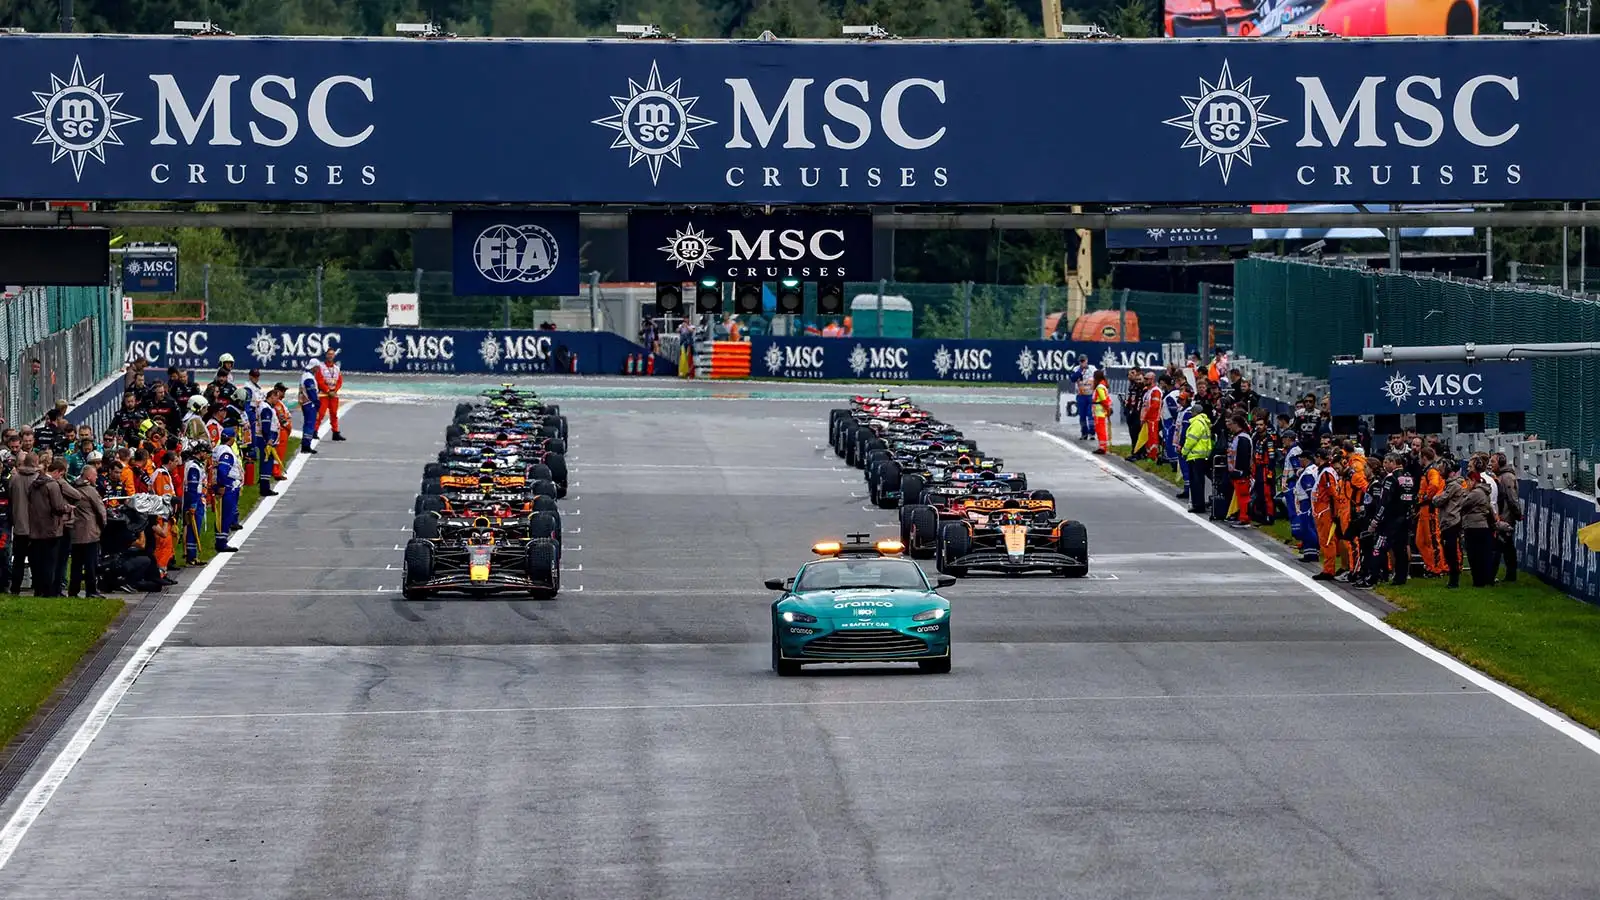 All 20 F1 drivers line up behind the Safety Car for the Belgian Grand Prix sprint race.